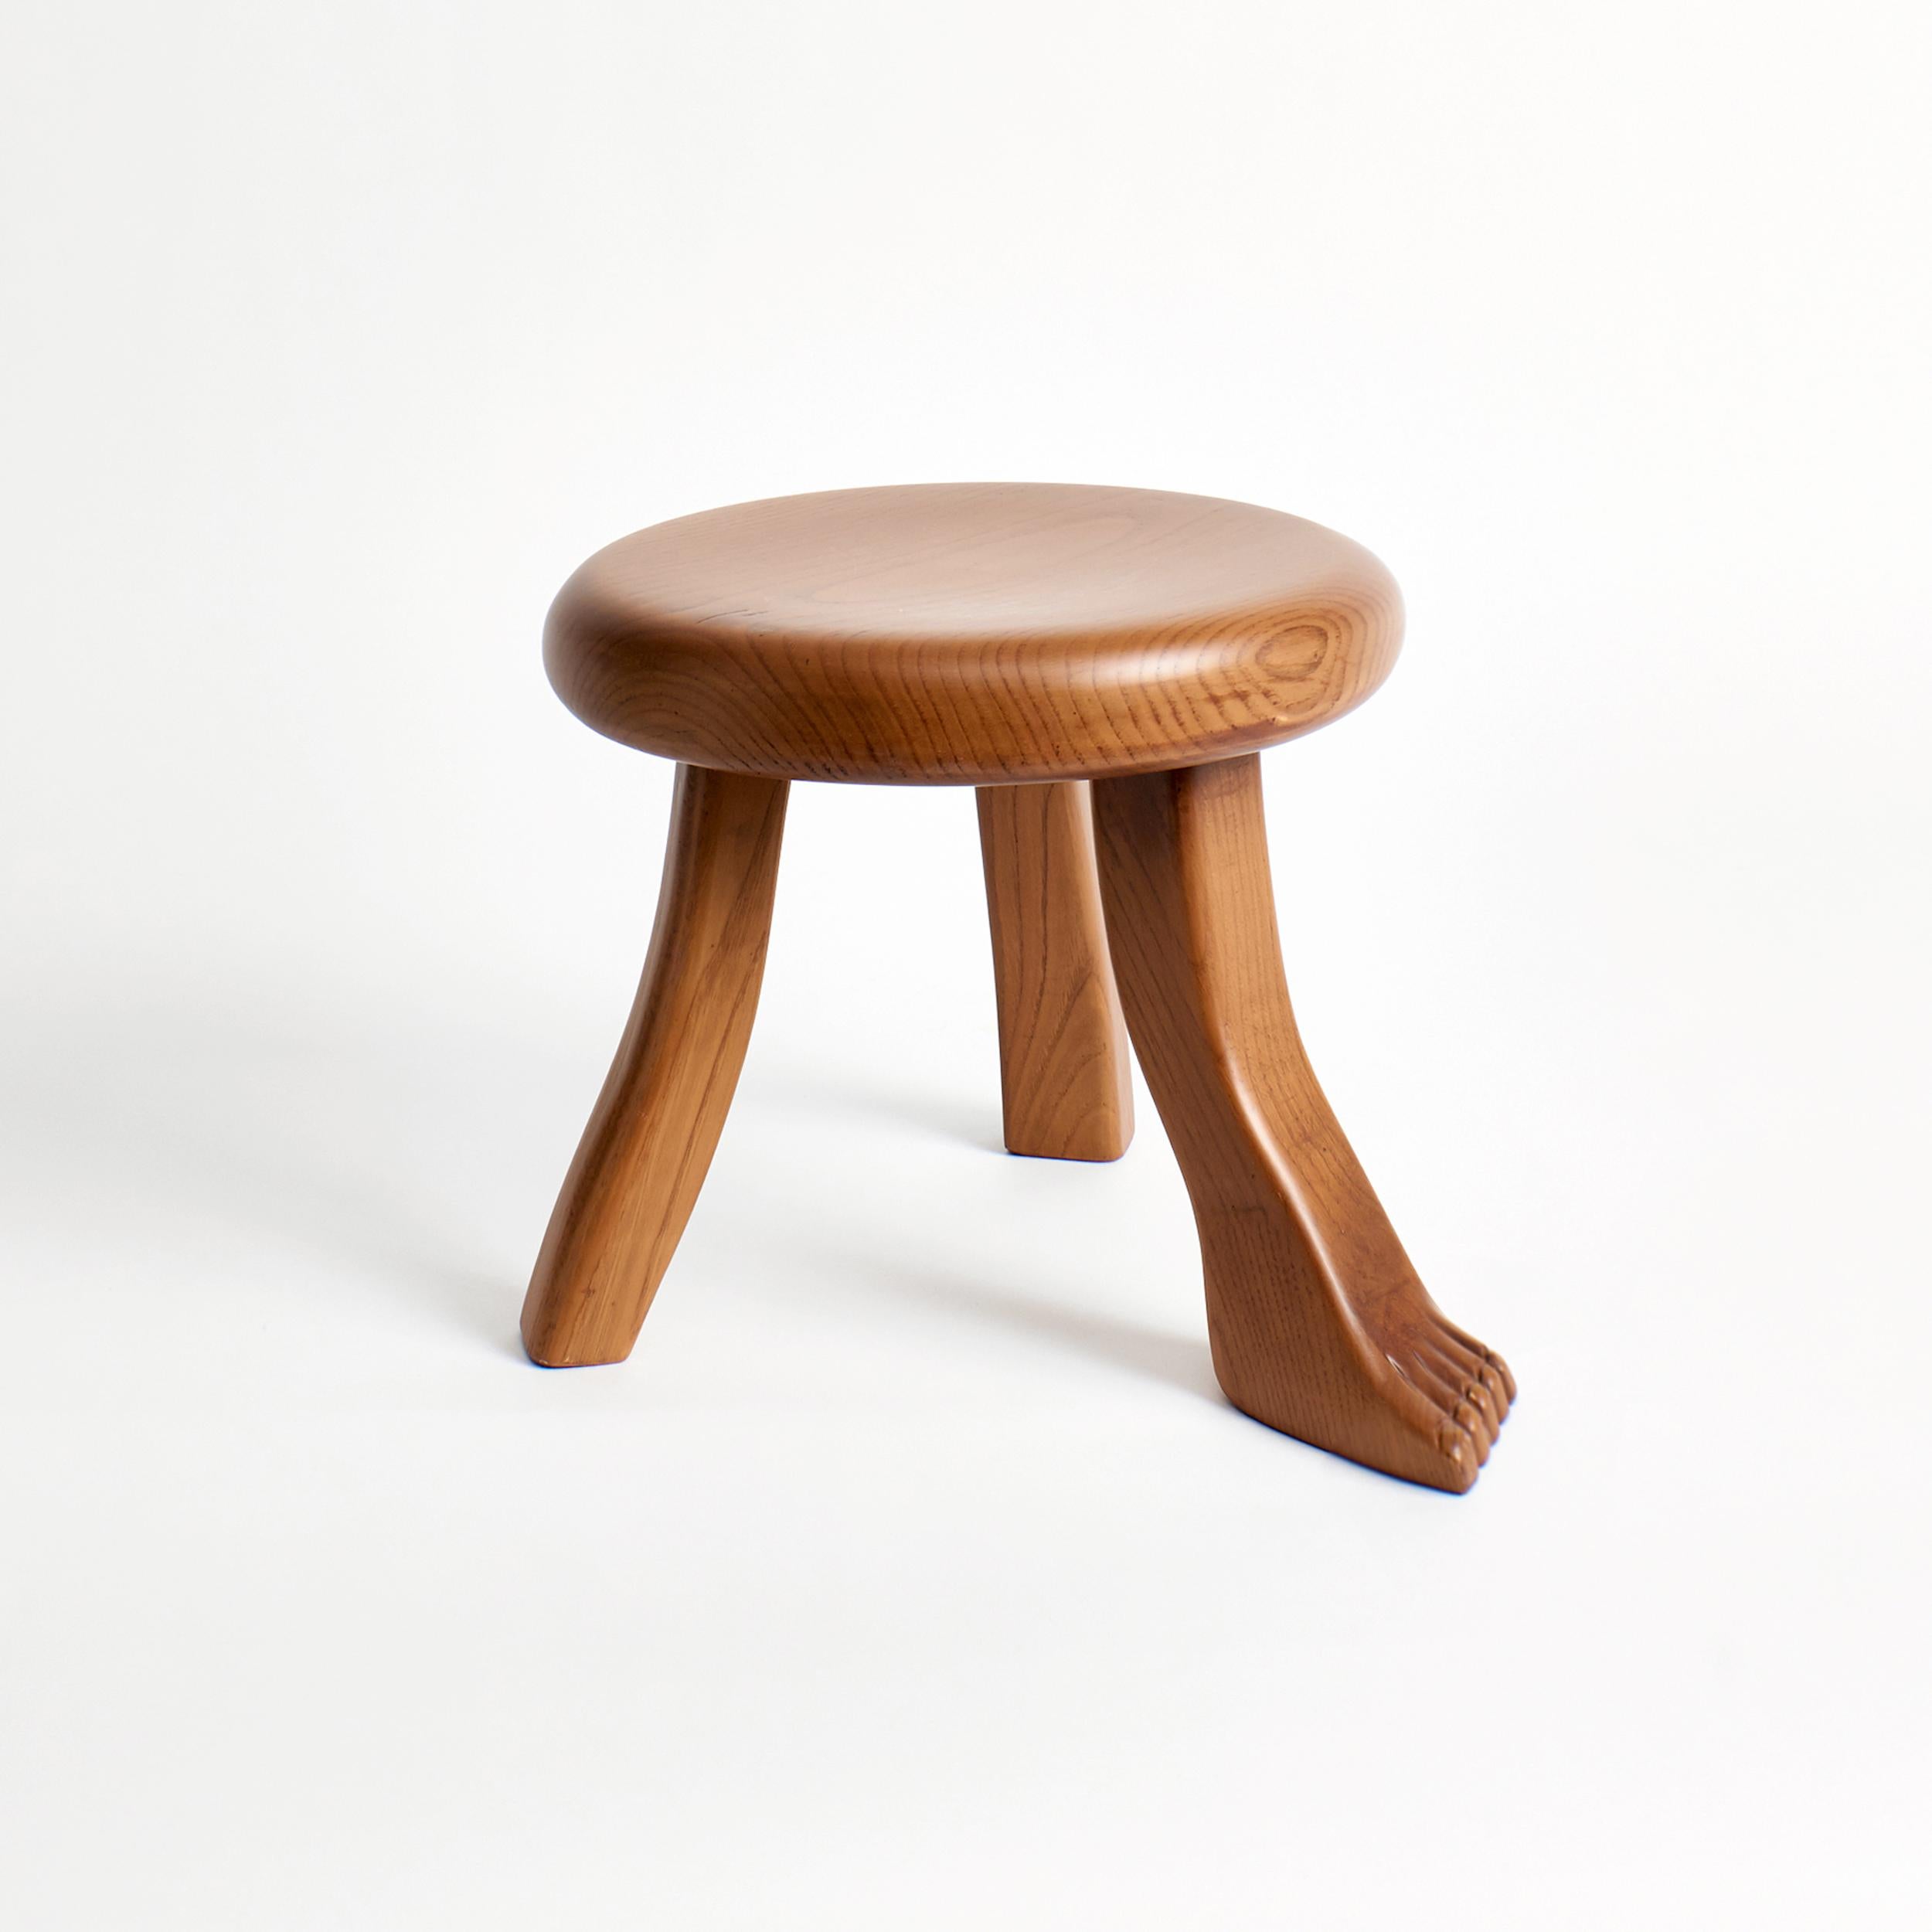 Foot stool in brown by Project 213A
Dimensions: D 30 x W 30 x H 26.5 cm
Materials: Chestnut wood. 

This playful design is inspired by a classic milking stool, and has a fun twist with three individually shaped legs. The stool is hand carved by